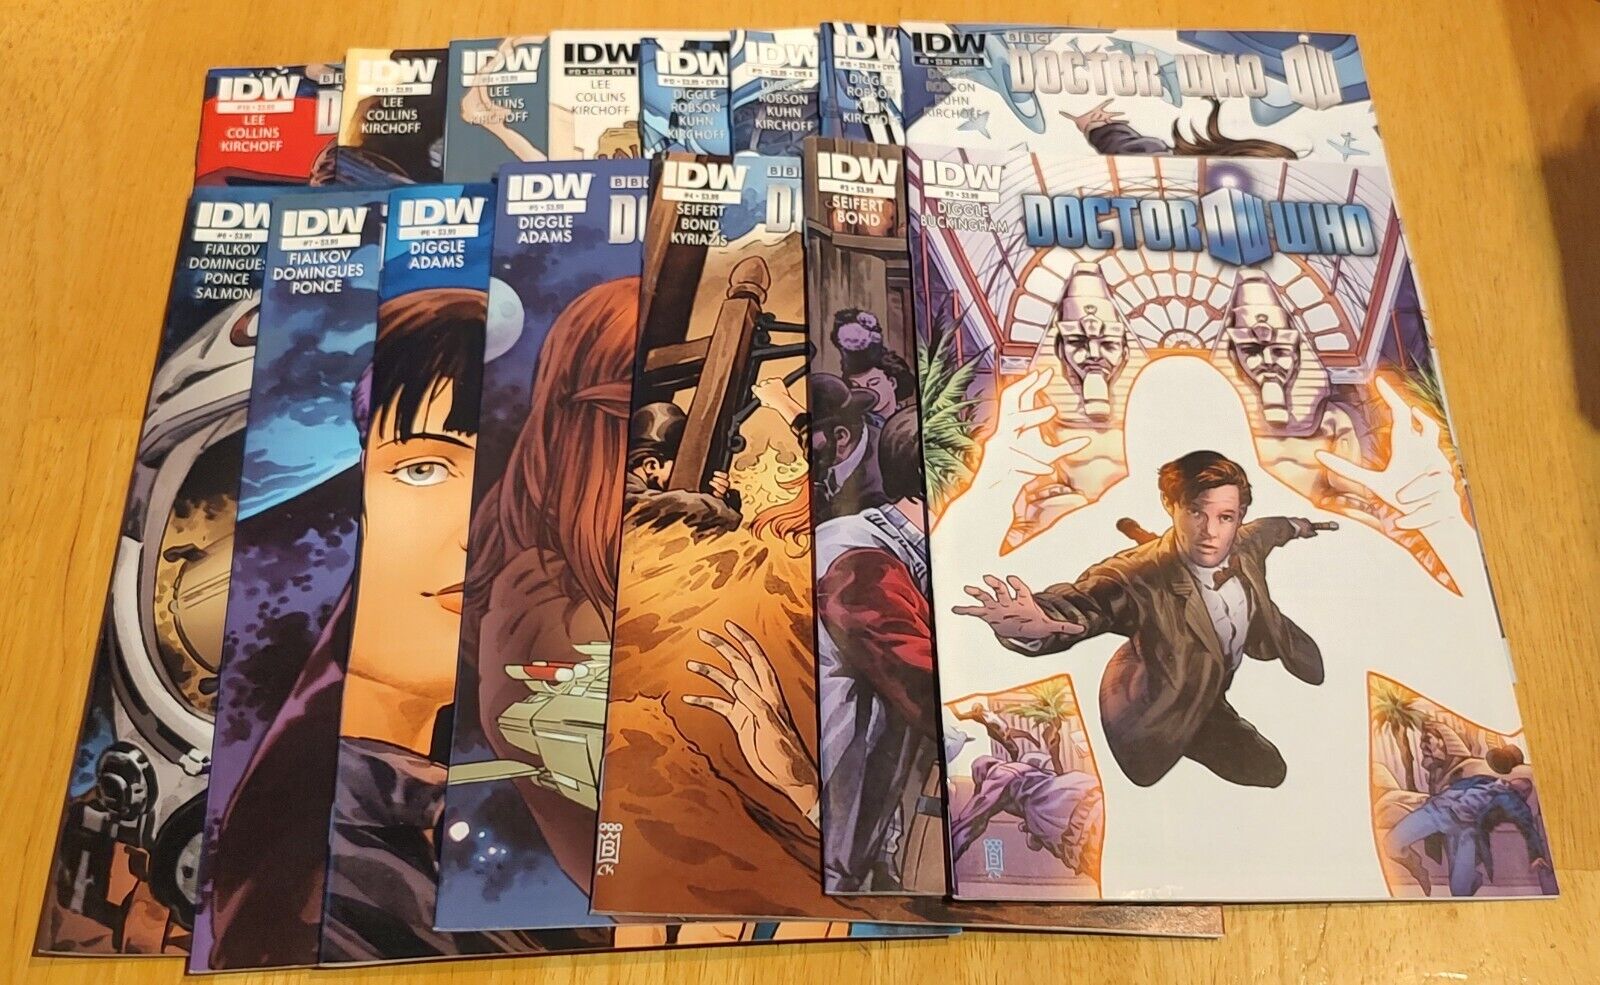 Doctor Who IDW Vol 3 2-16 